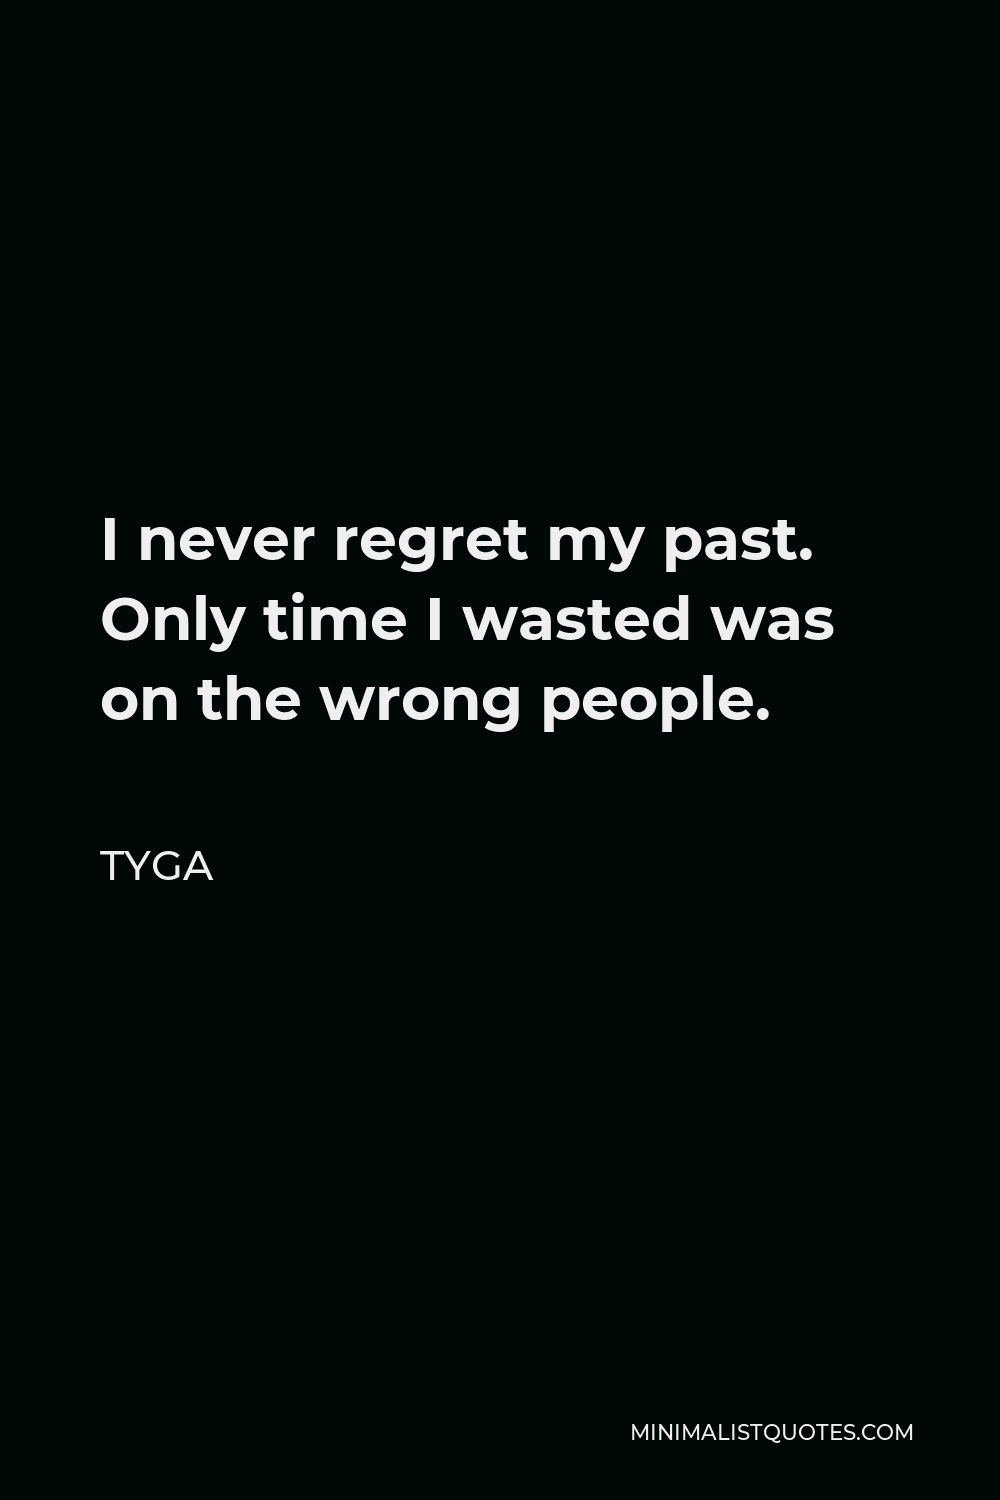 Tyga Quote - I never regret my past. Only time I wasted was on the wrong people.